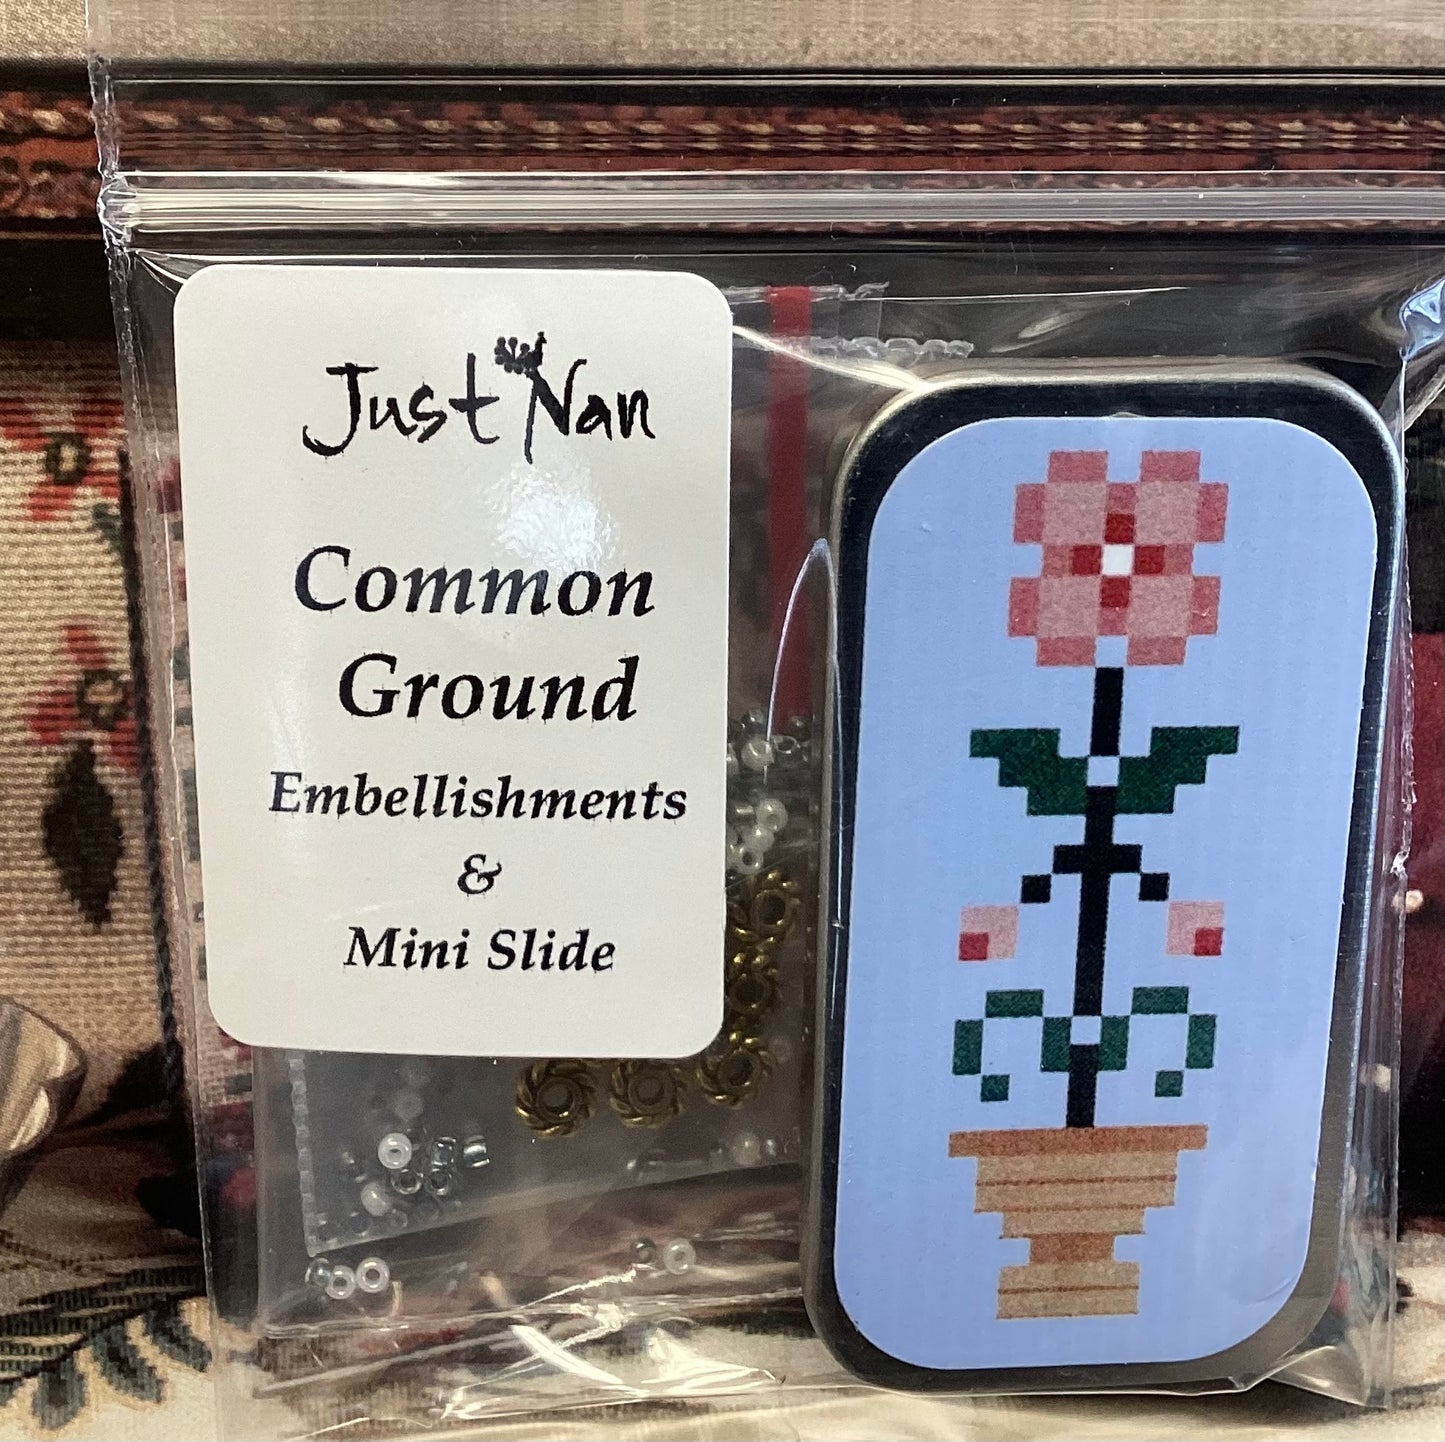 Common Ground By Just Nan